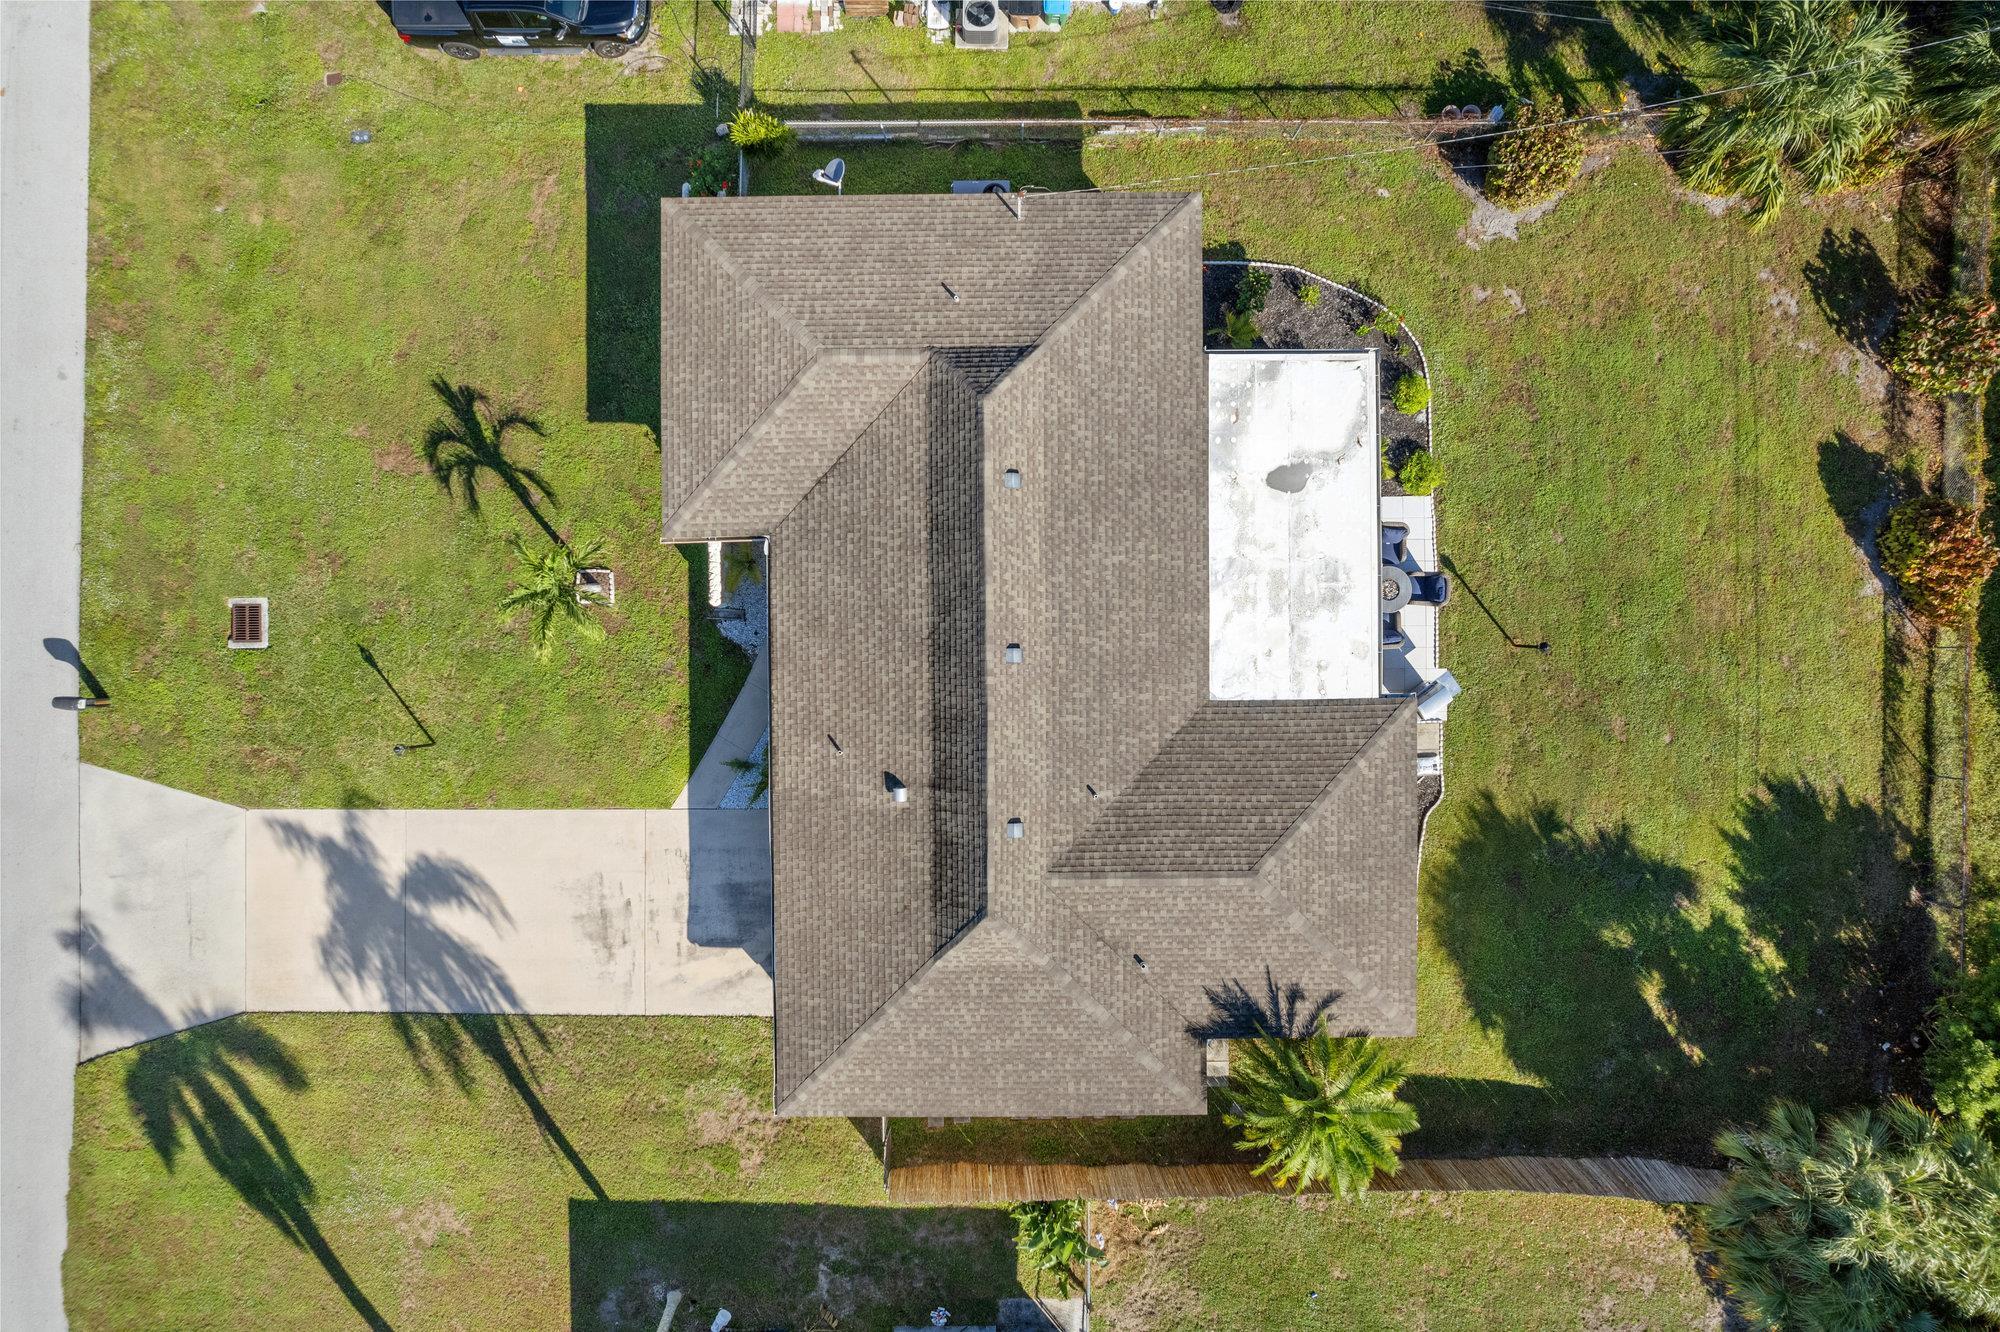 2623 SE 17th Ave, Cape Coral, Florida 33904, 3 Bedrooms Bedrooms, ,2 BathroomsBathrooms,Residential,For Sale,SE 17th Ave,2231076